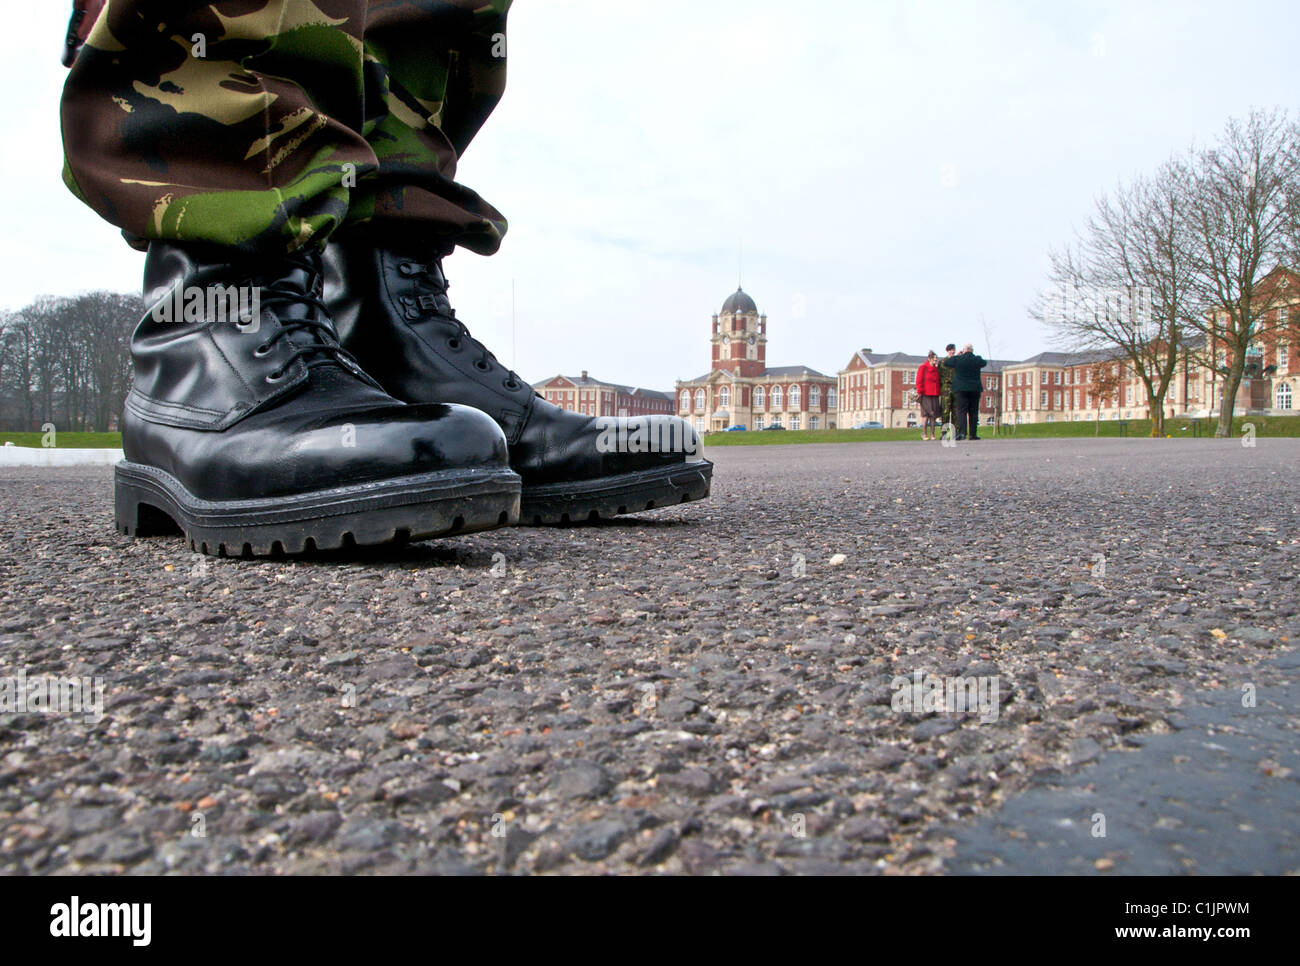 A soldier's boots on the Parade Ground of the Royal Military Academy Sandhurst Stock Photo